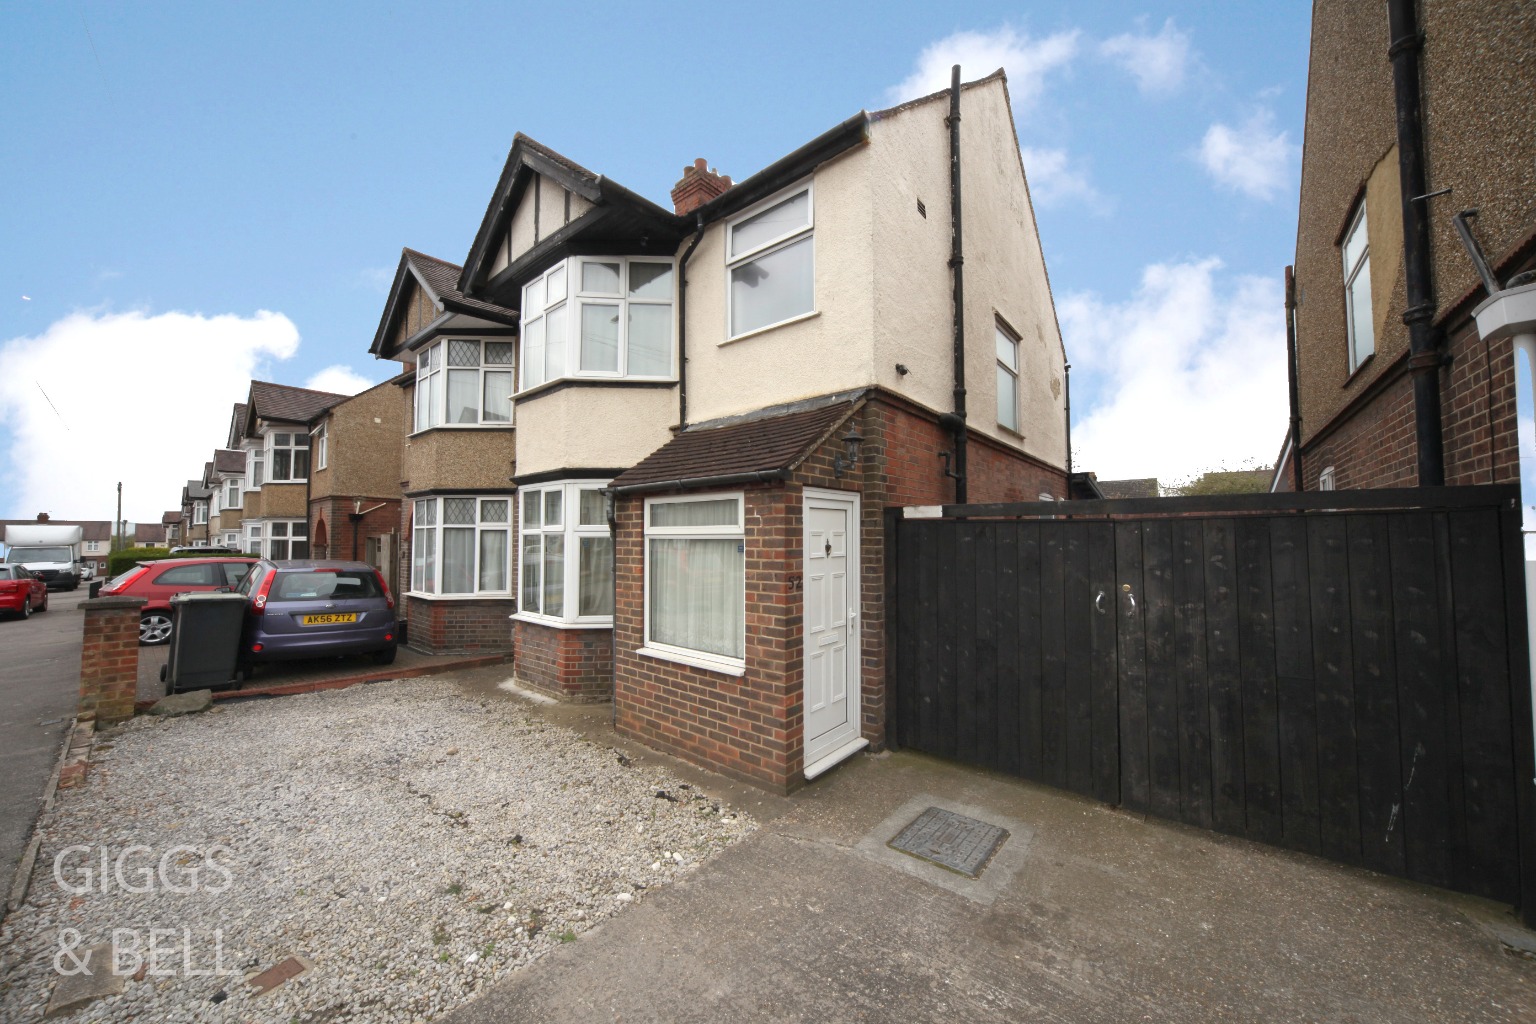 3 bed semi-detached house for sale in Durham Road, Luton, LU2 